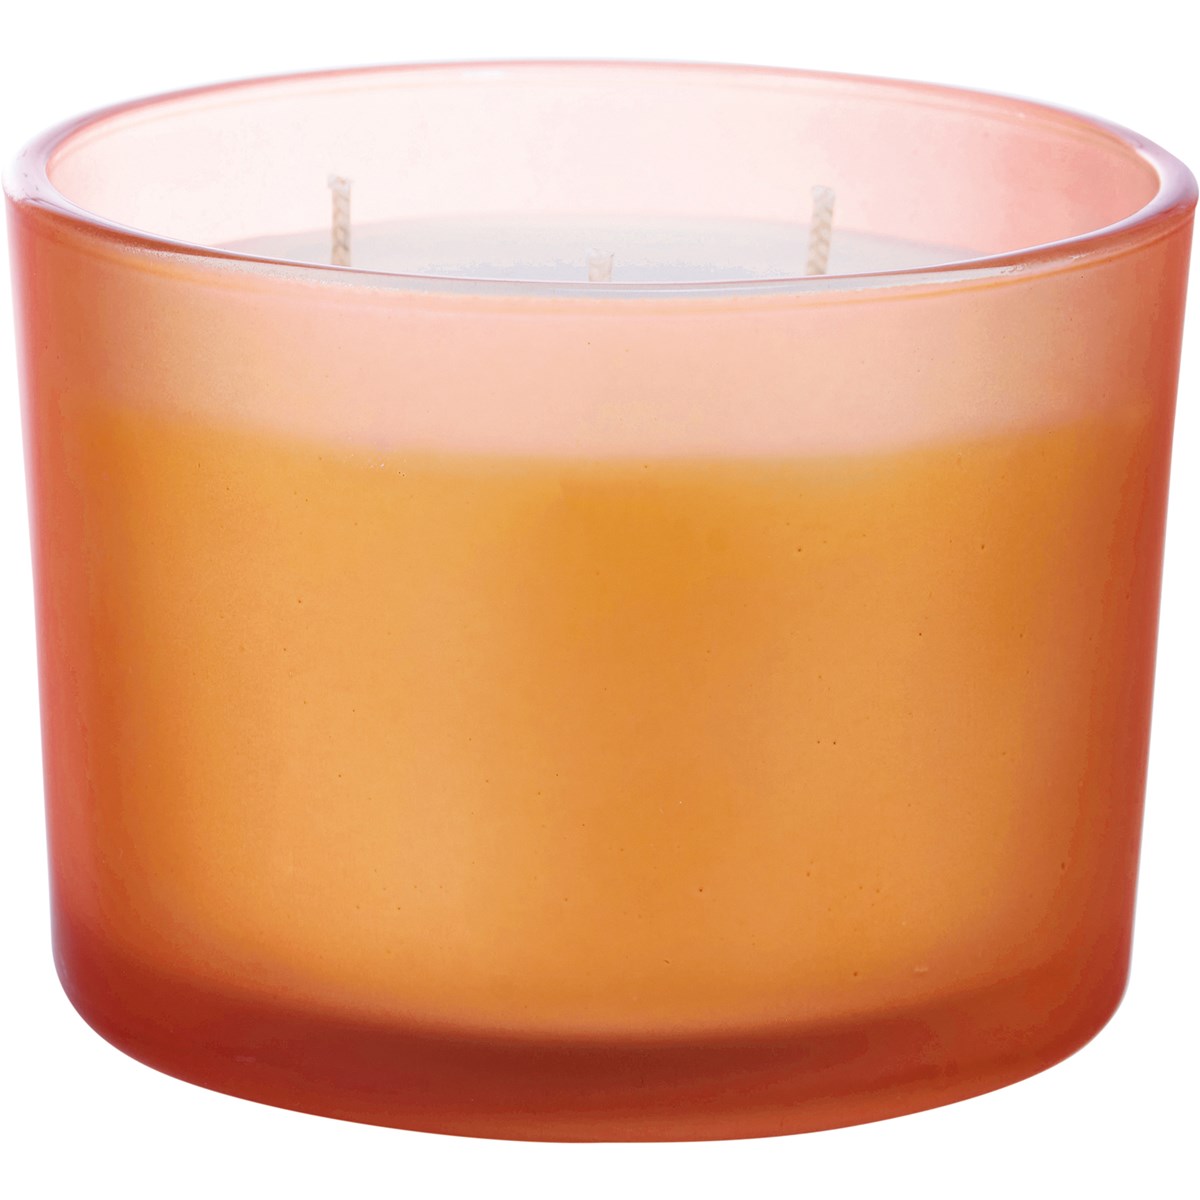 Fall Is Here Candle - Soy Wax, Glass, Cotton